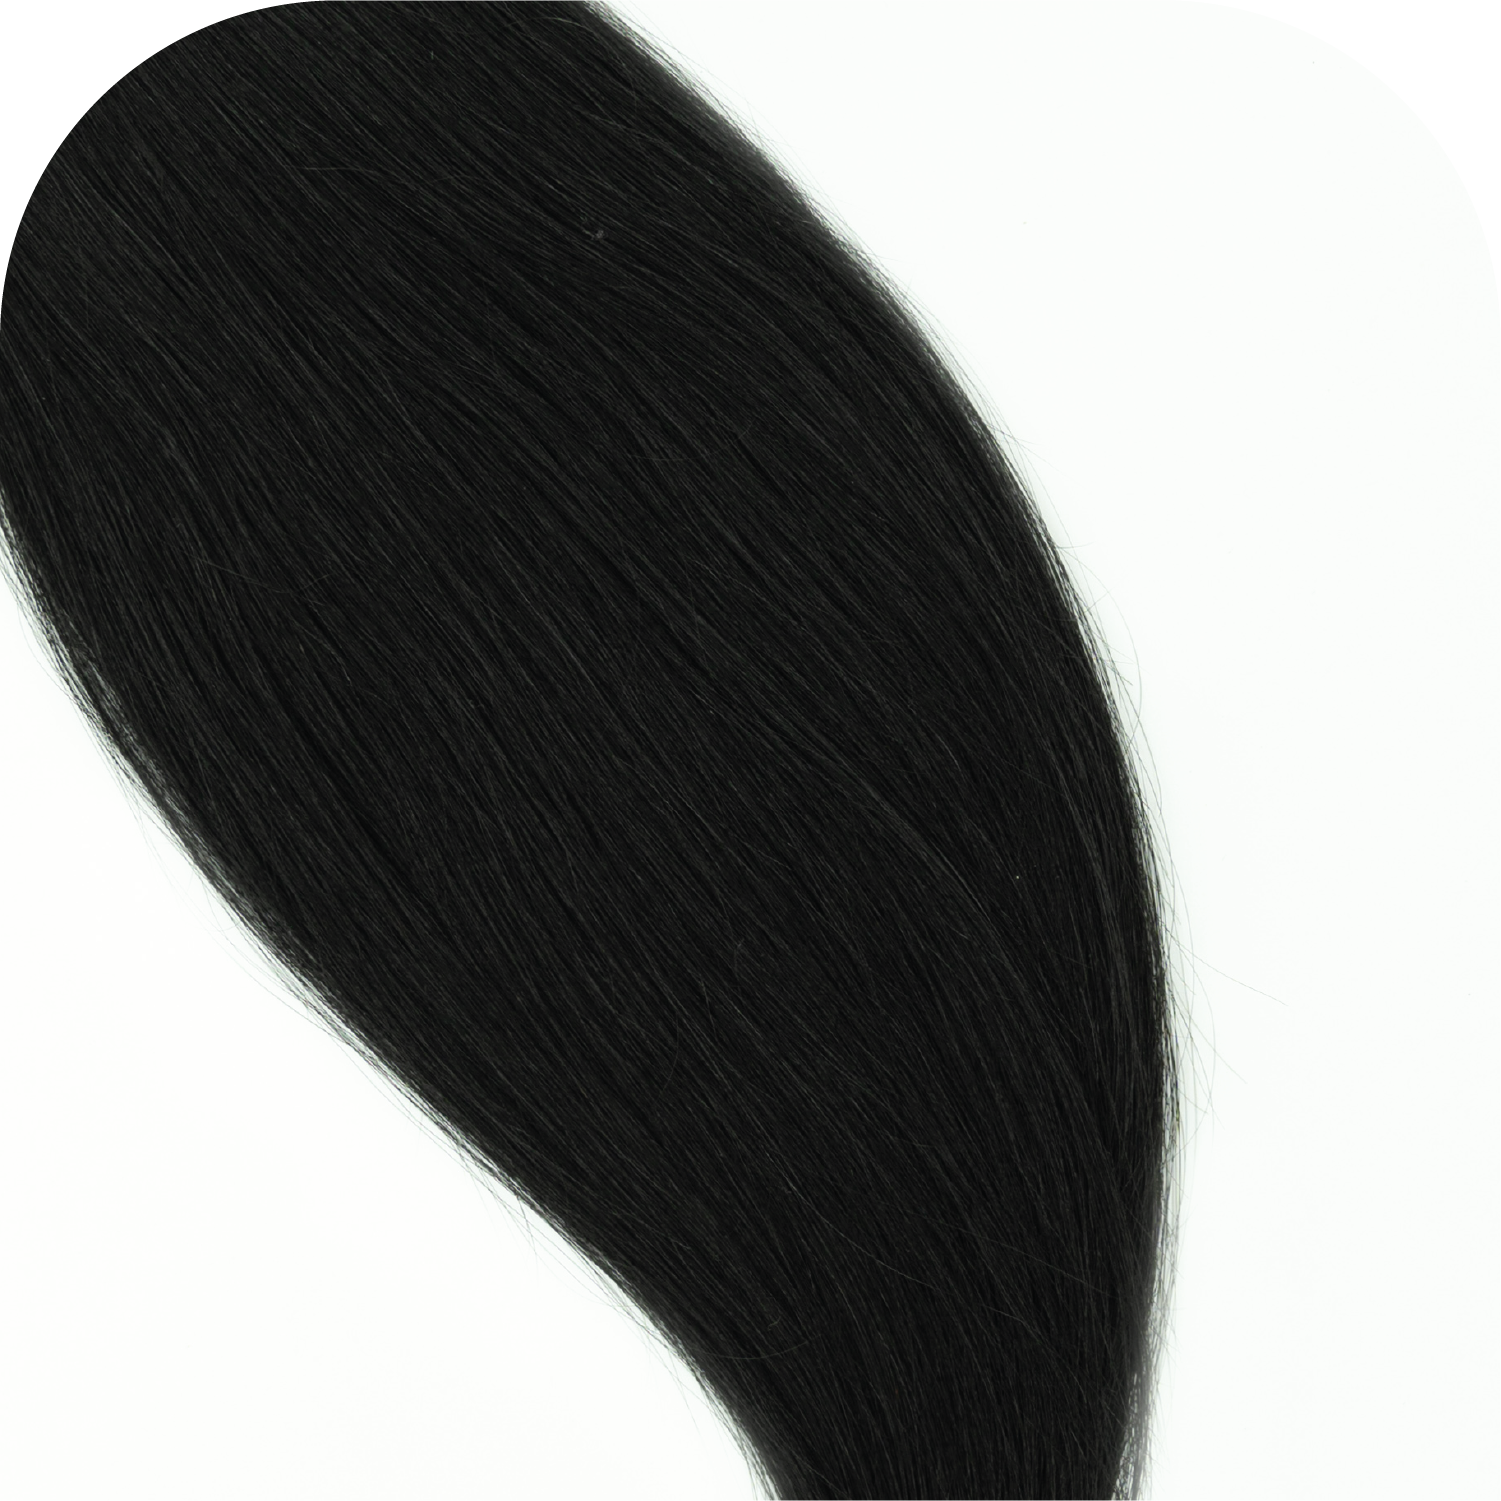 Couture Hair Co. Couture Tip or K-Tip in Color Black #1